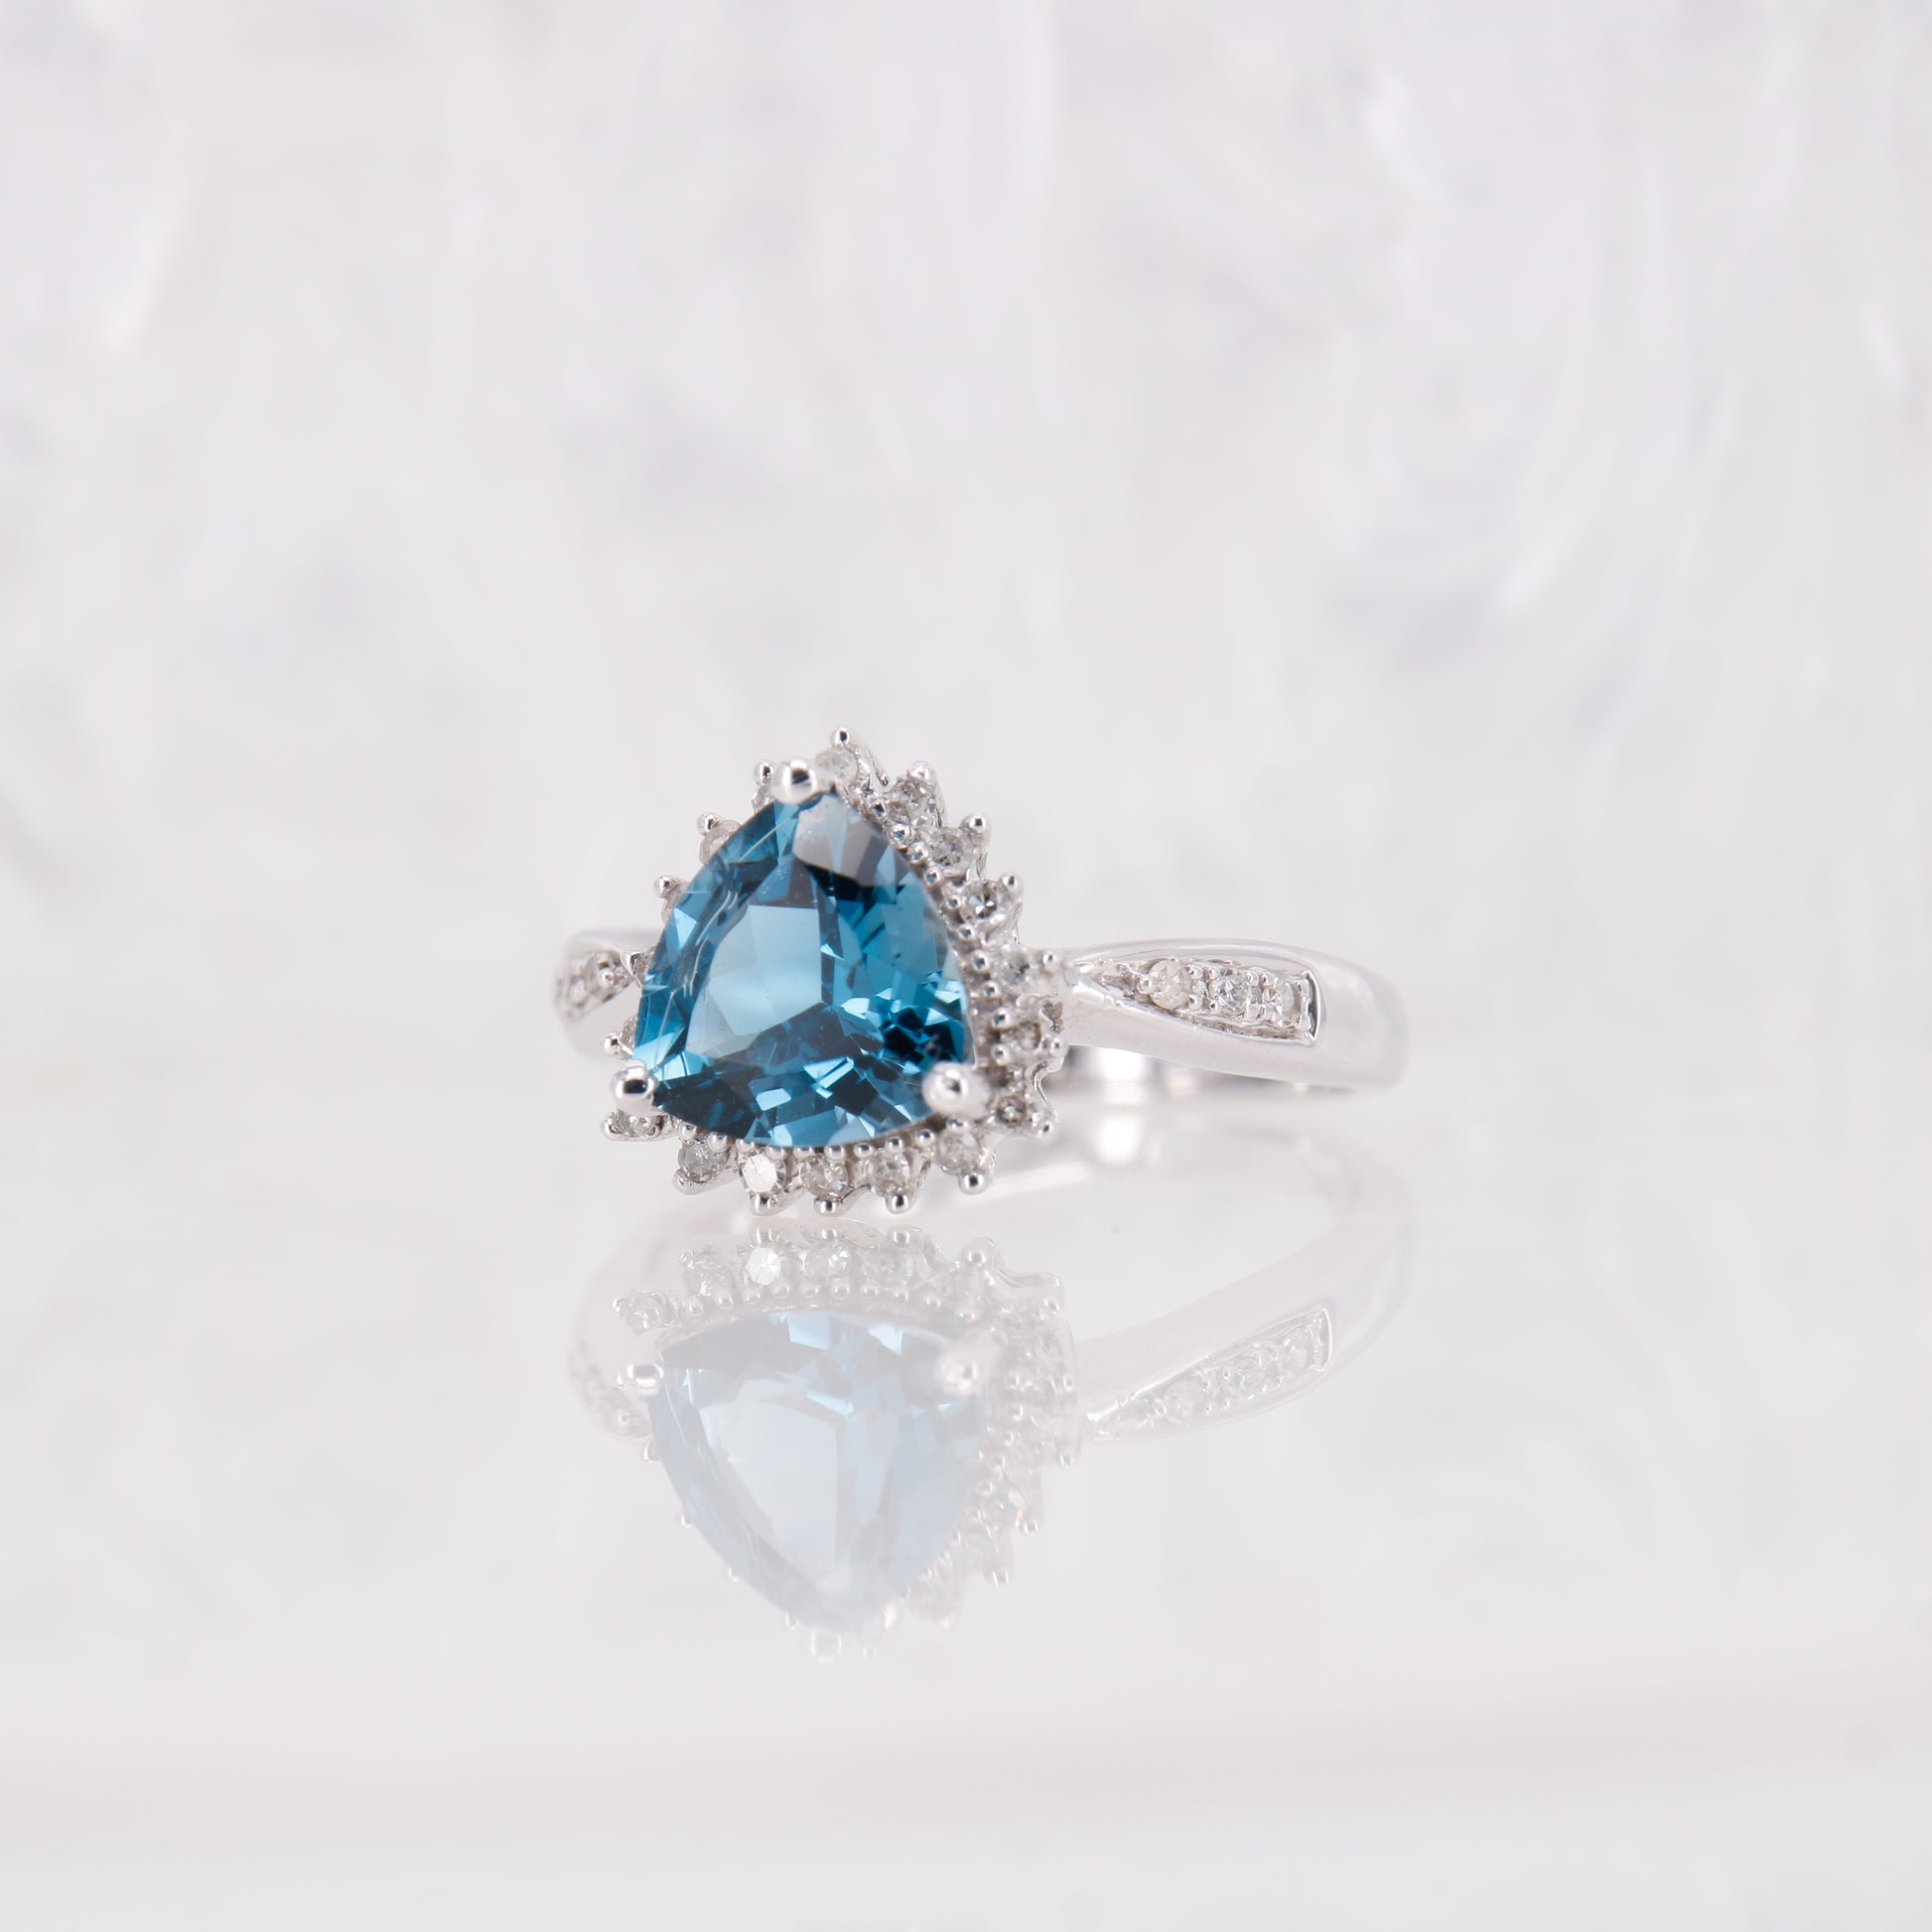 Blue Topaz and Diamond ring, Trilliant cut blue topaz with a halo of diamonds, white gold.